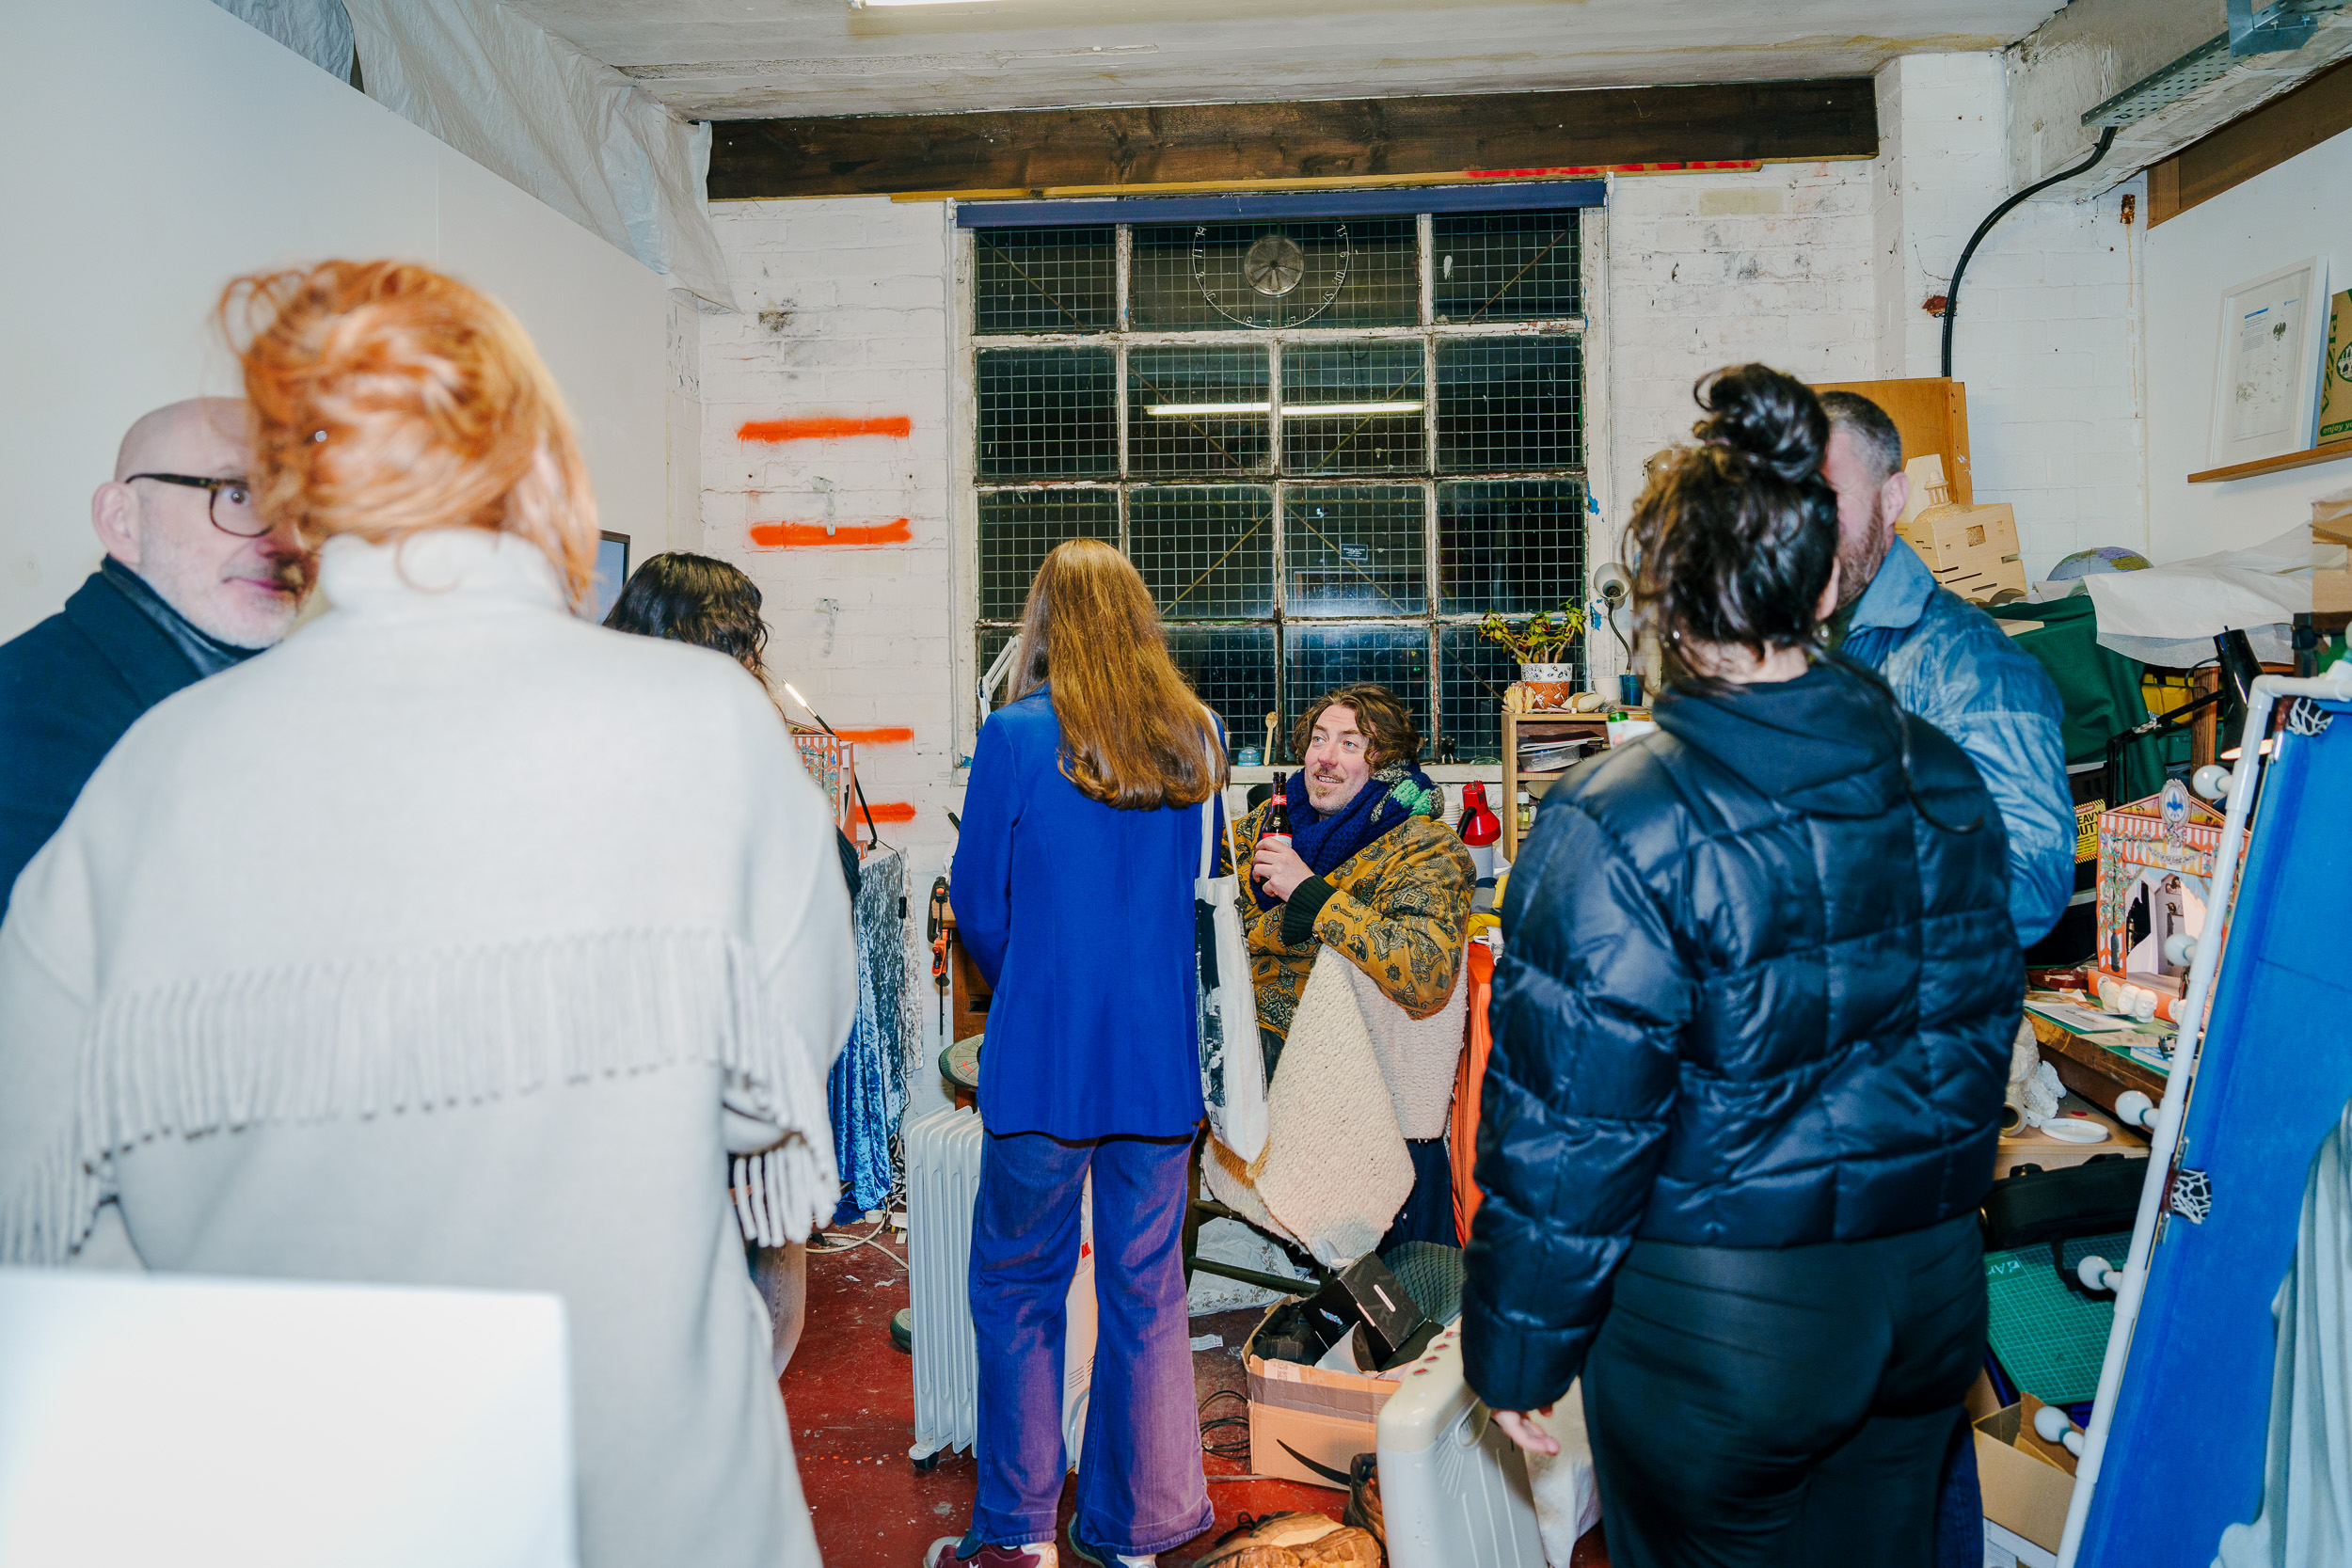 A group of people milling about and chatting in an artists studio.